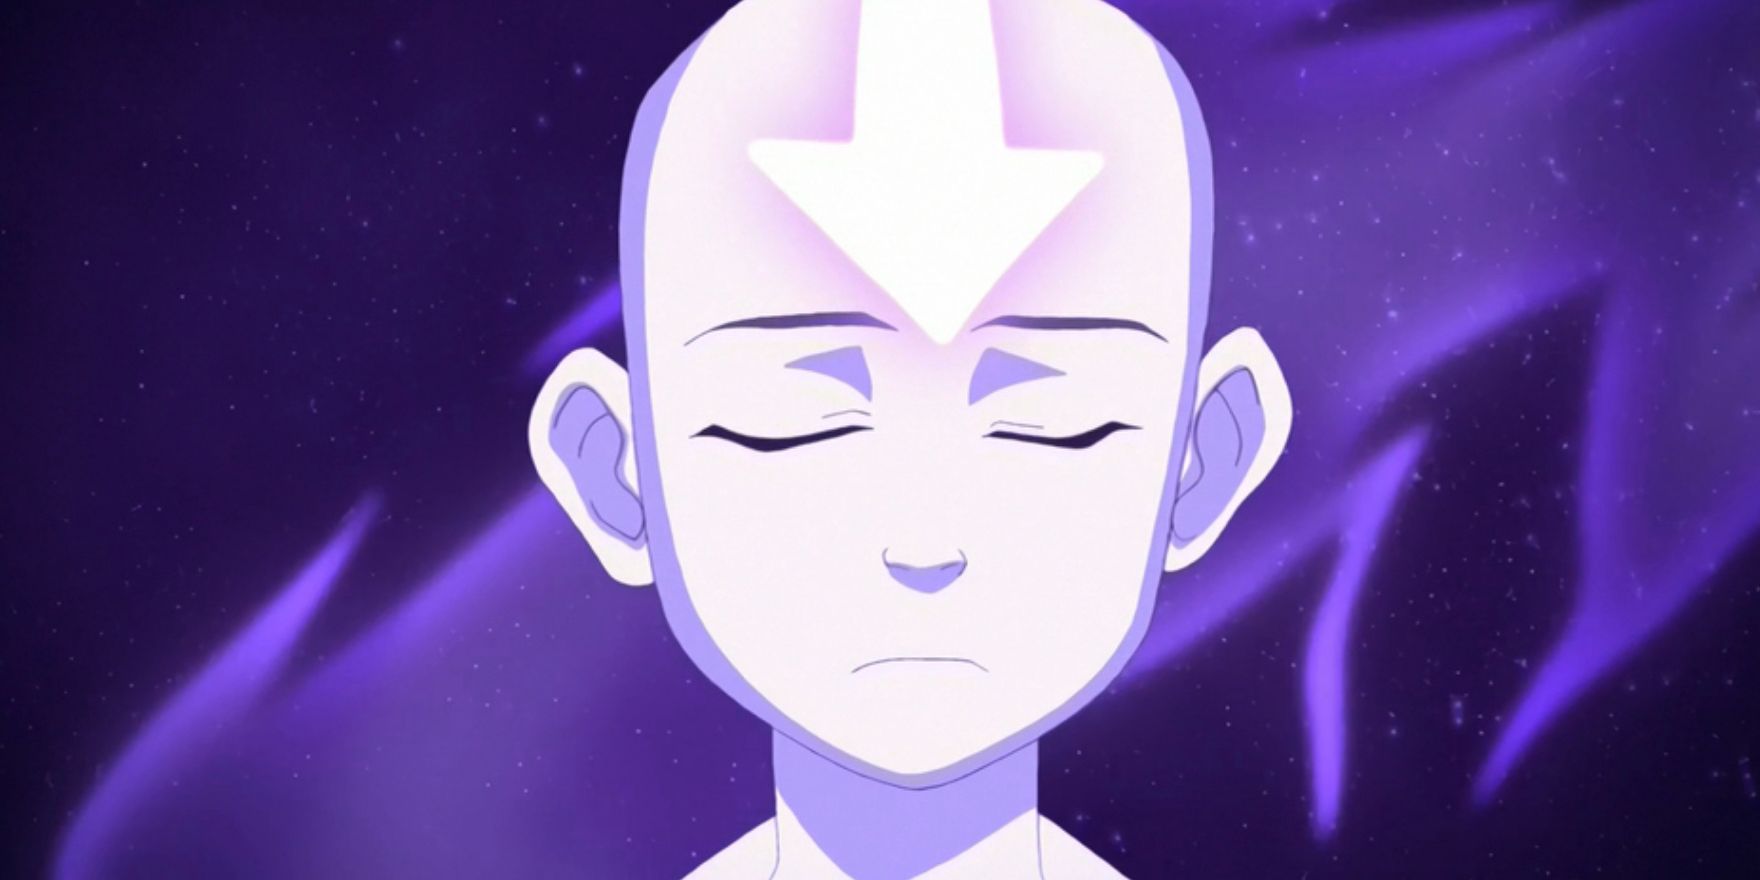 Aang glowing in purple light while he meditates in the animated Avatar The Last Airbender episode The Guru